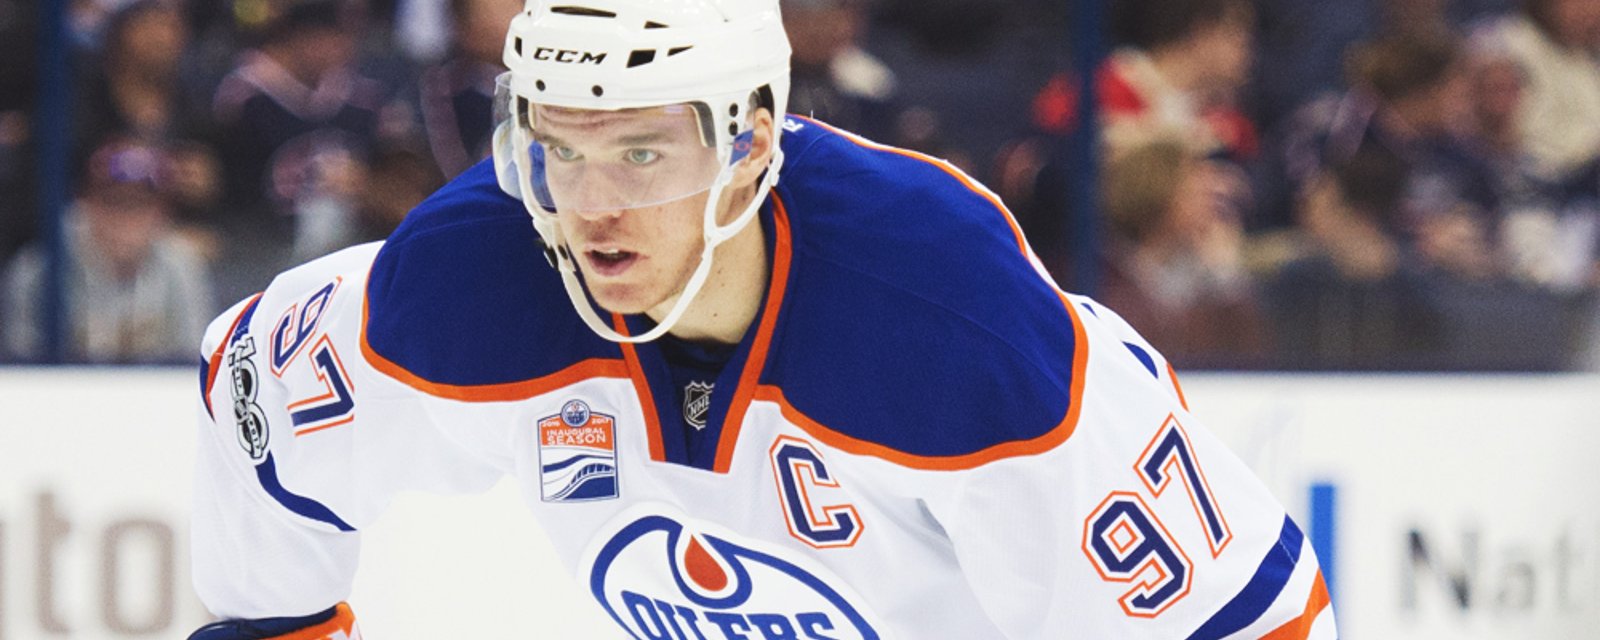 Breaking: Connor McDavid has officially signed a monster contract extension.